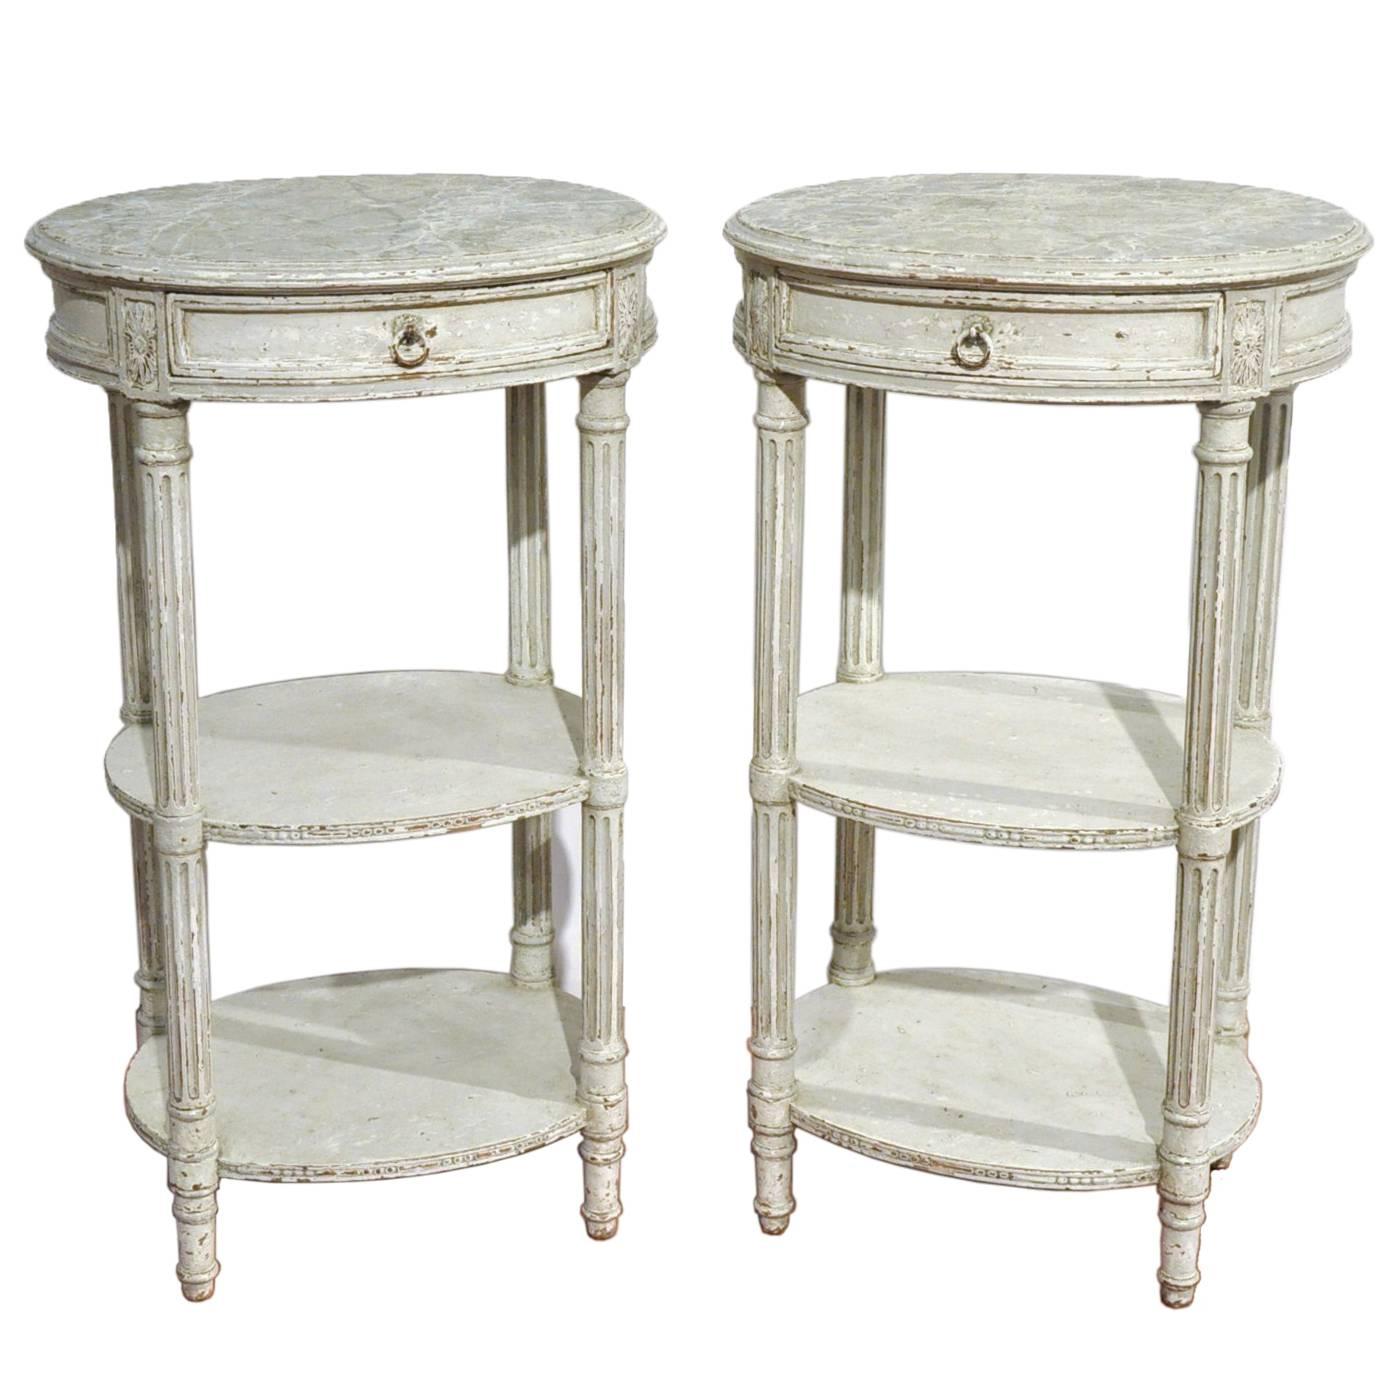 Pair of 19th Century French Louis XVI Painted Oval Tables with Faux Marble Top